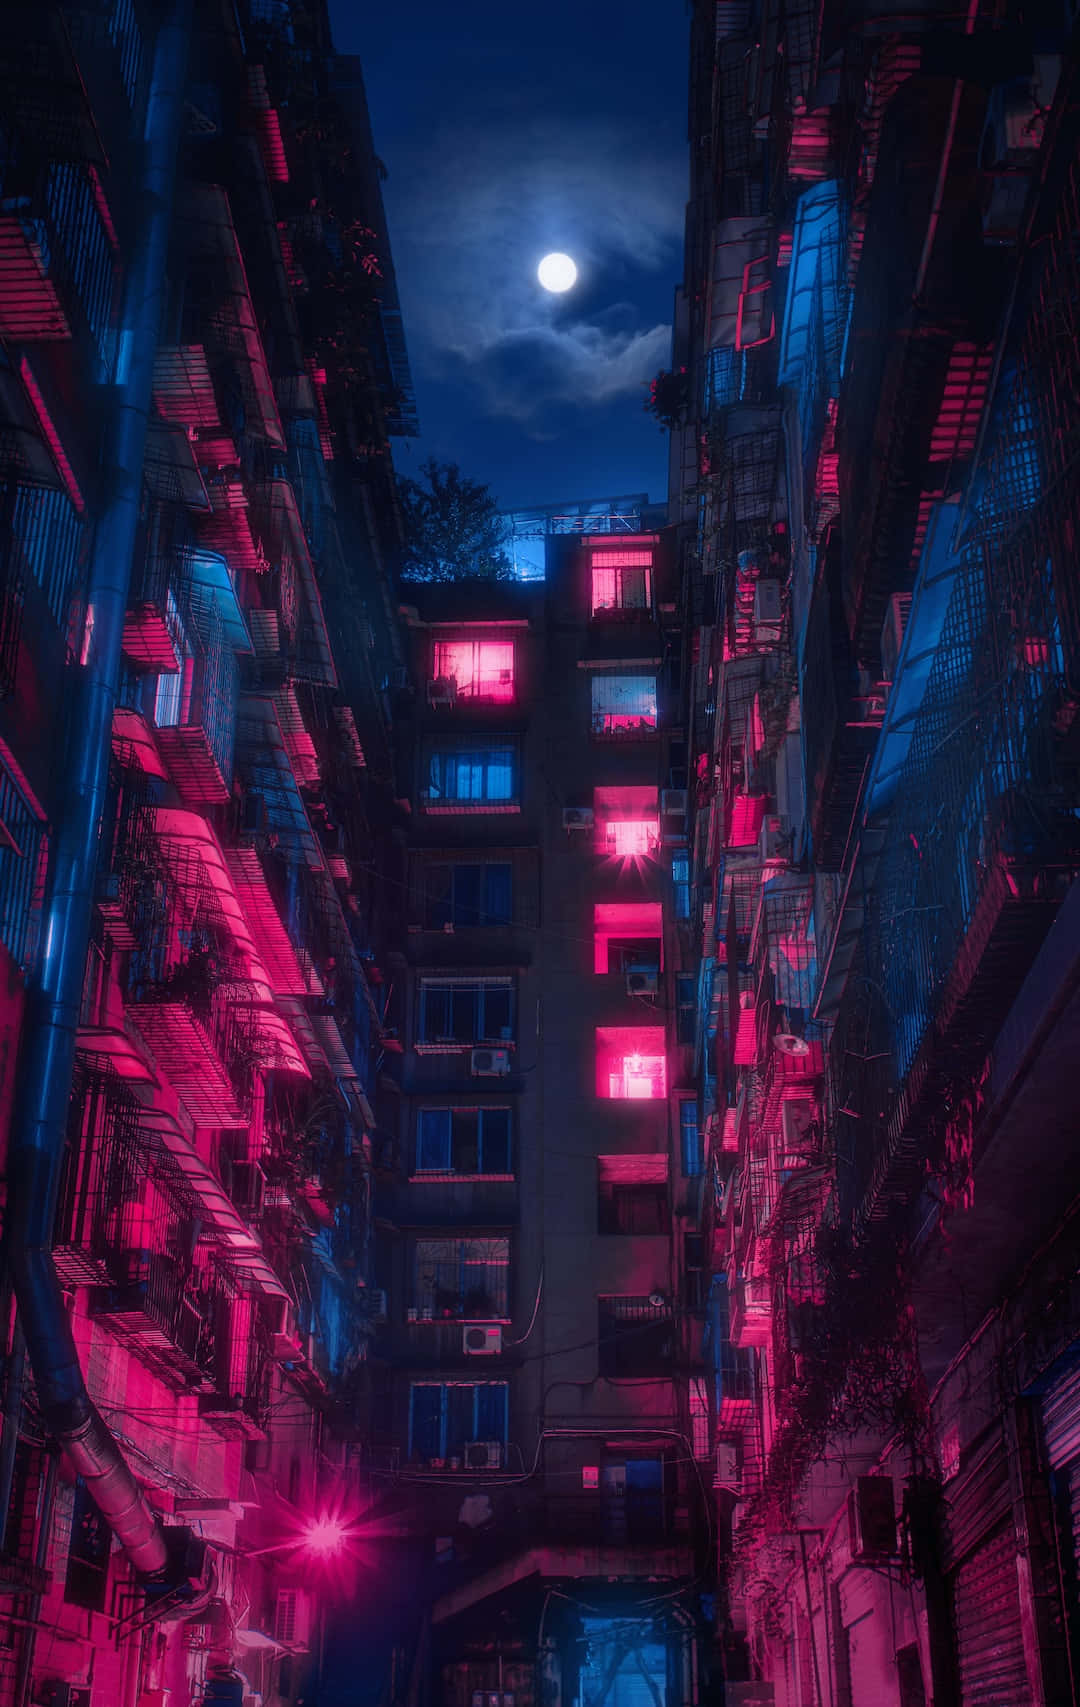 Welcome to the future of Cyberpunk City